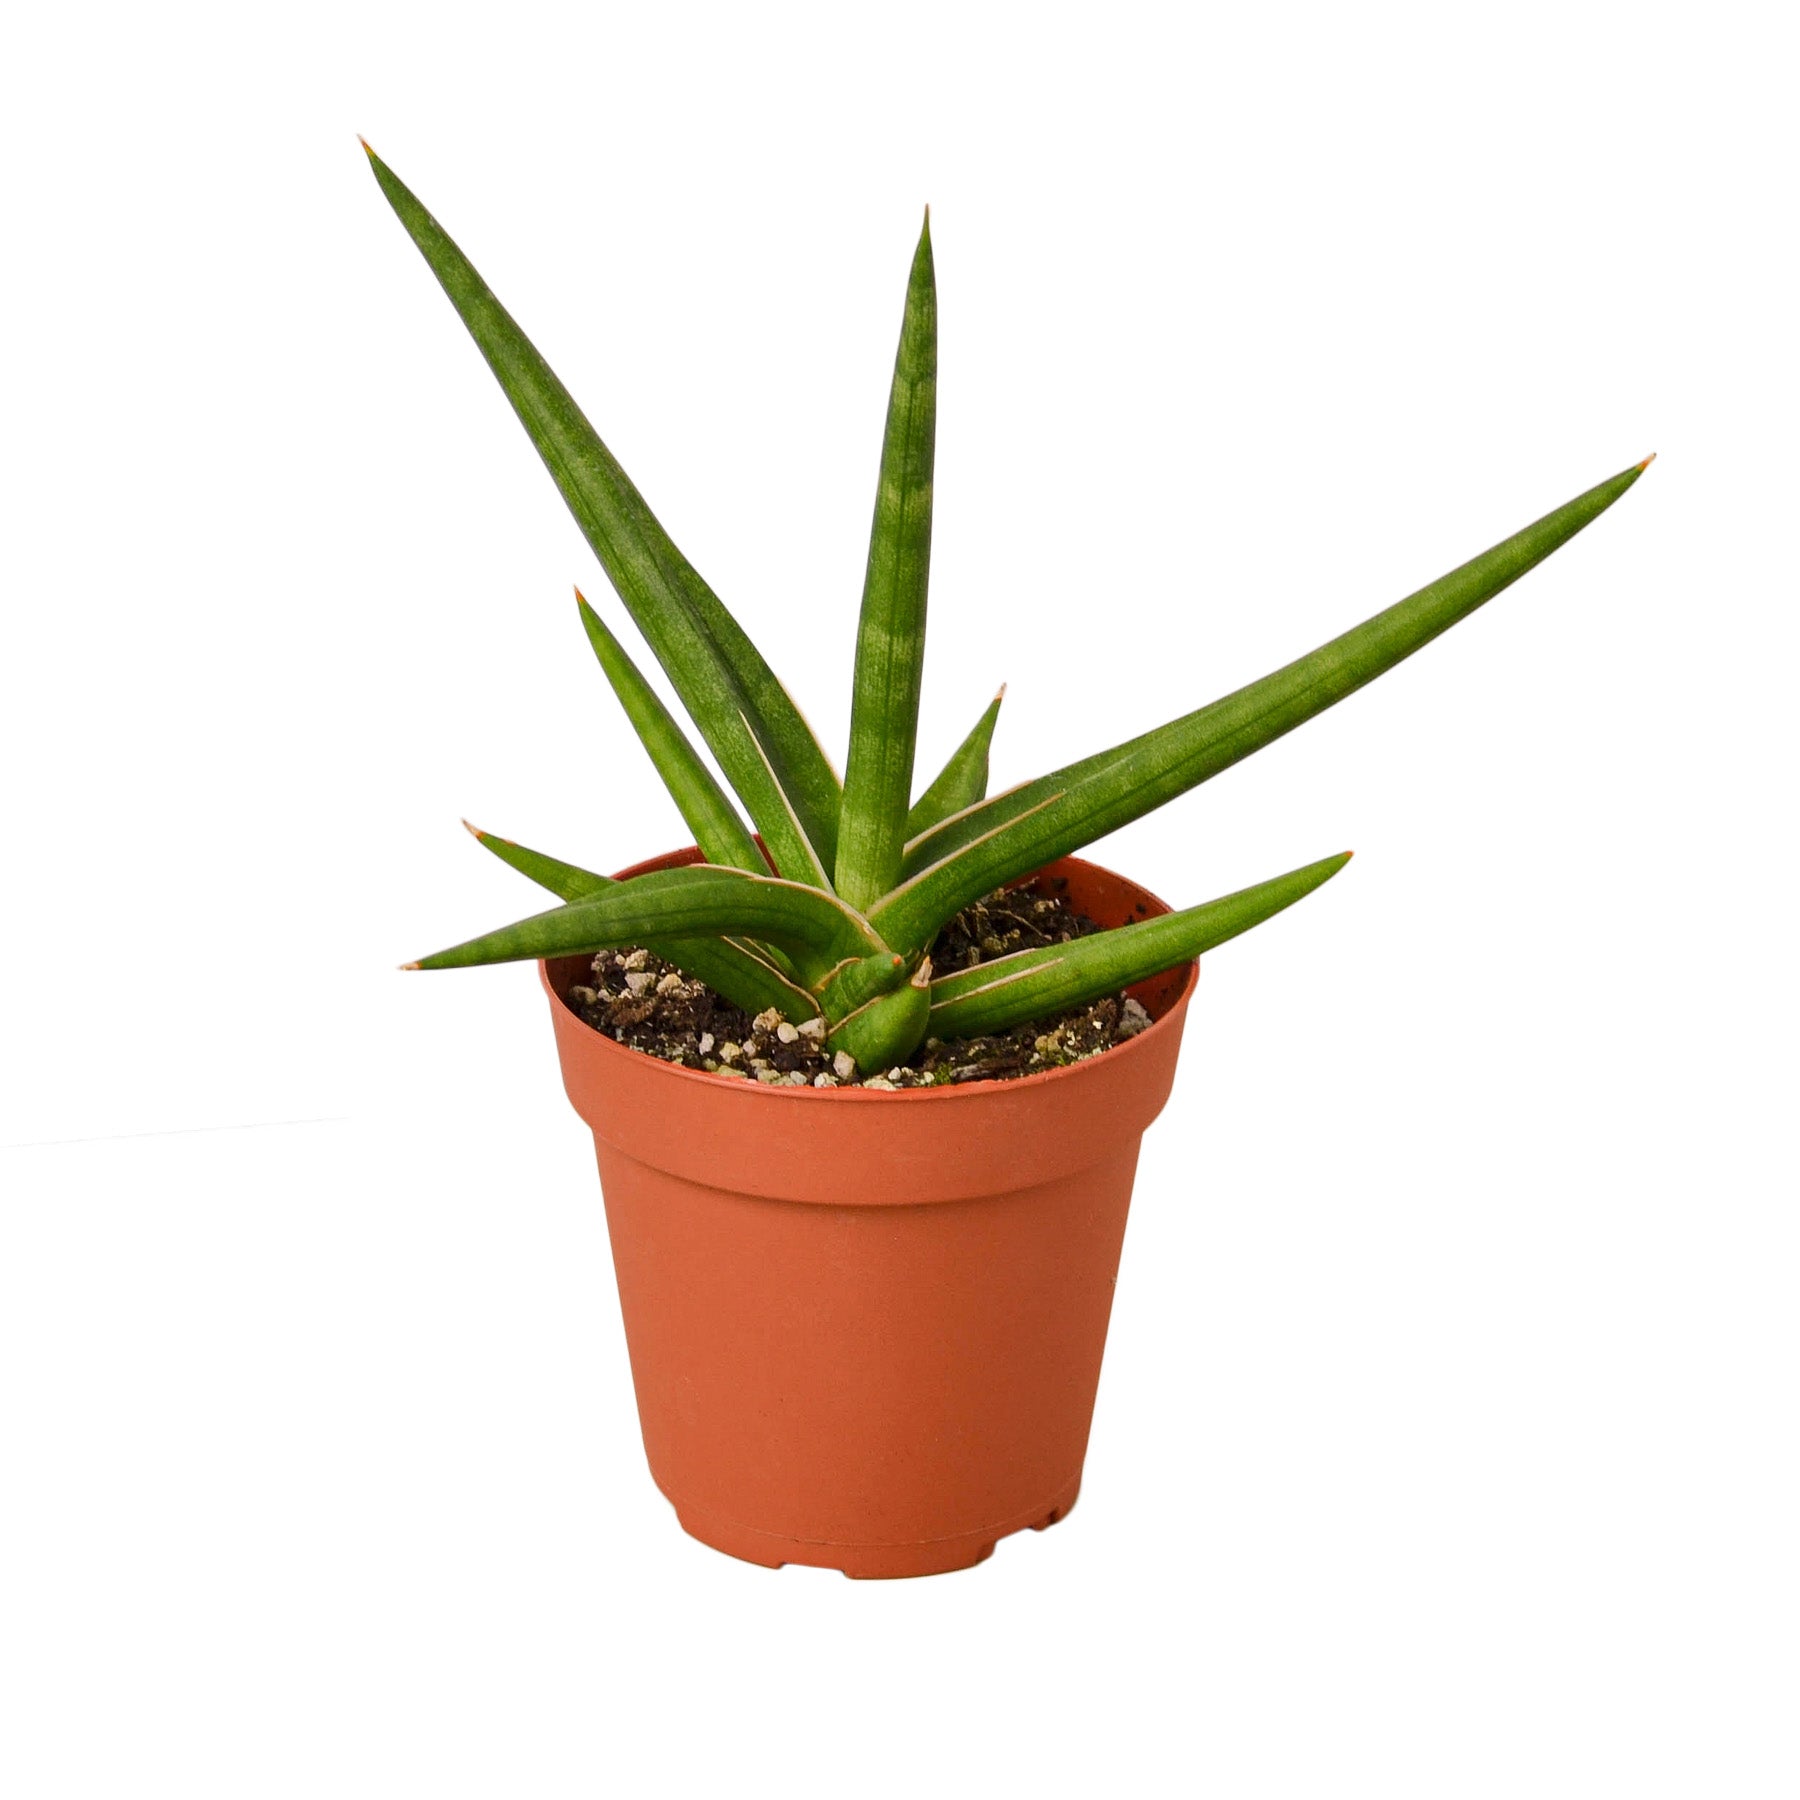 Aloe vera plant in a pot on a white background at the best garden center near me.